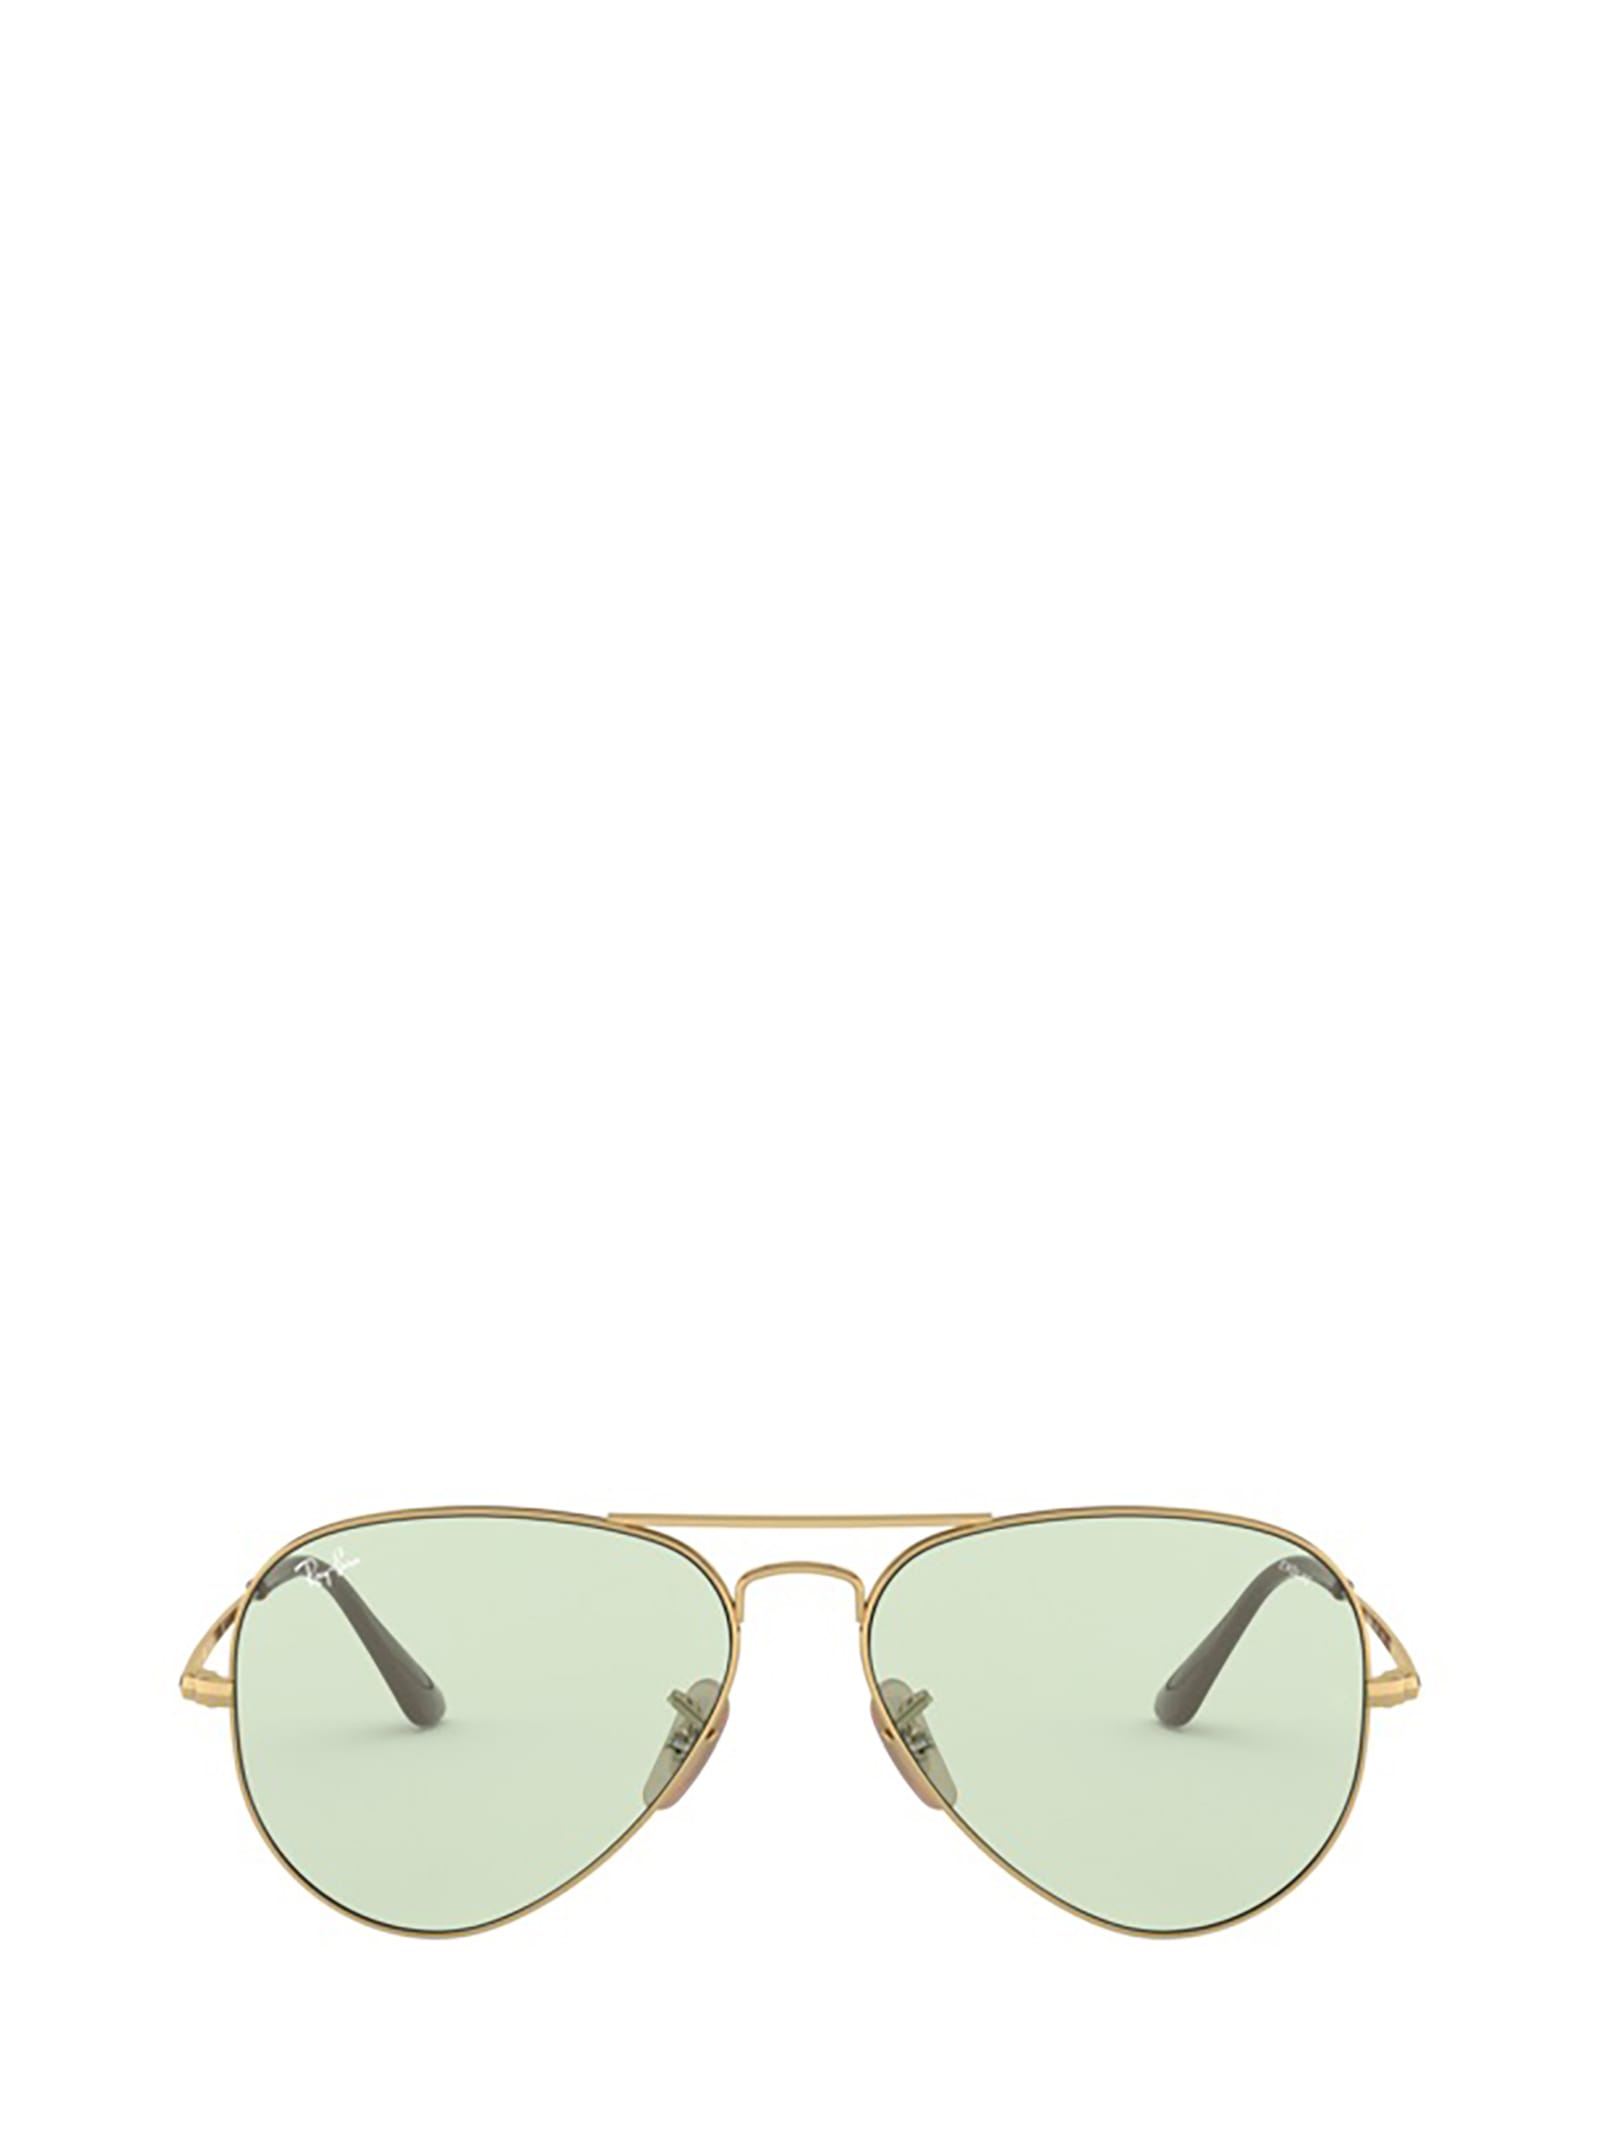 Ray Ban Rb3689 Gold Sunglasses